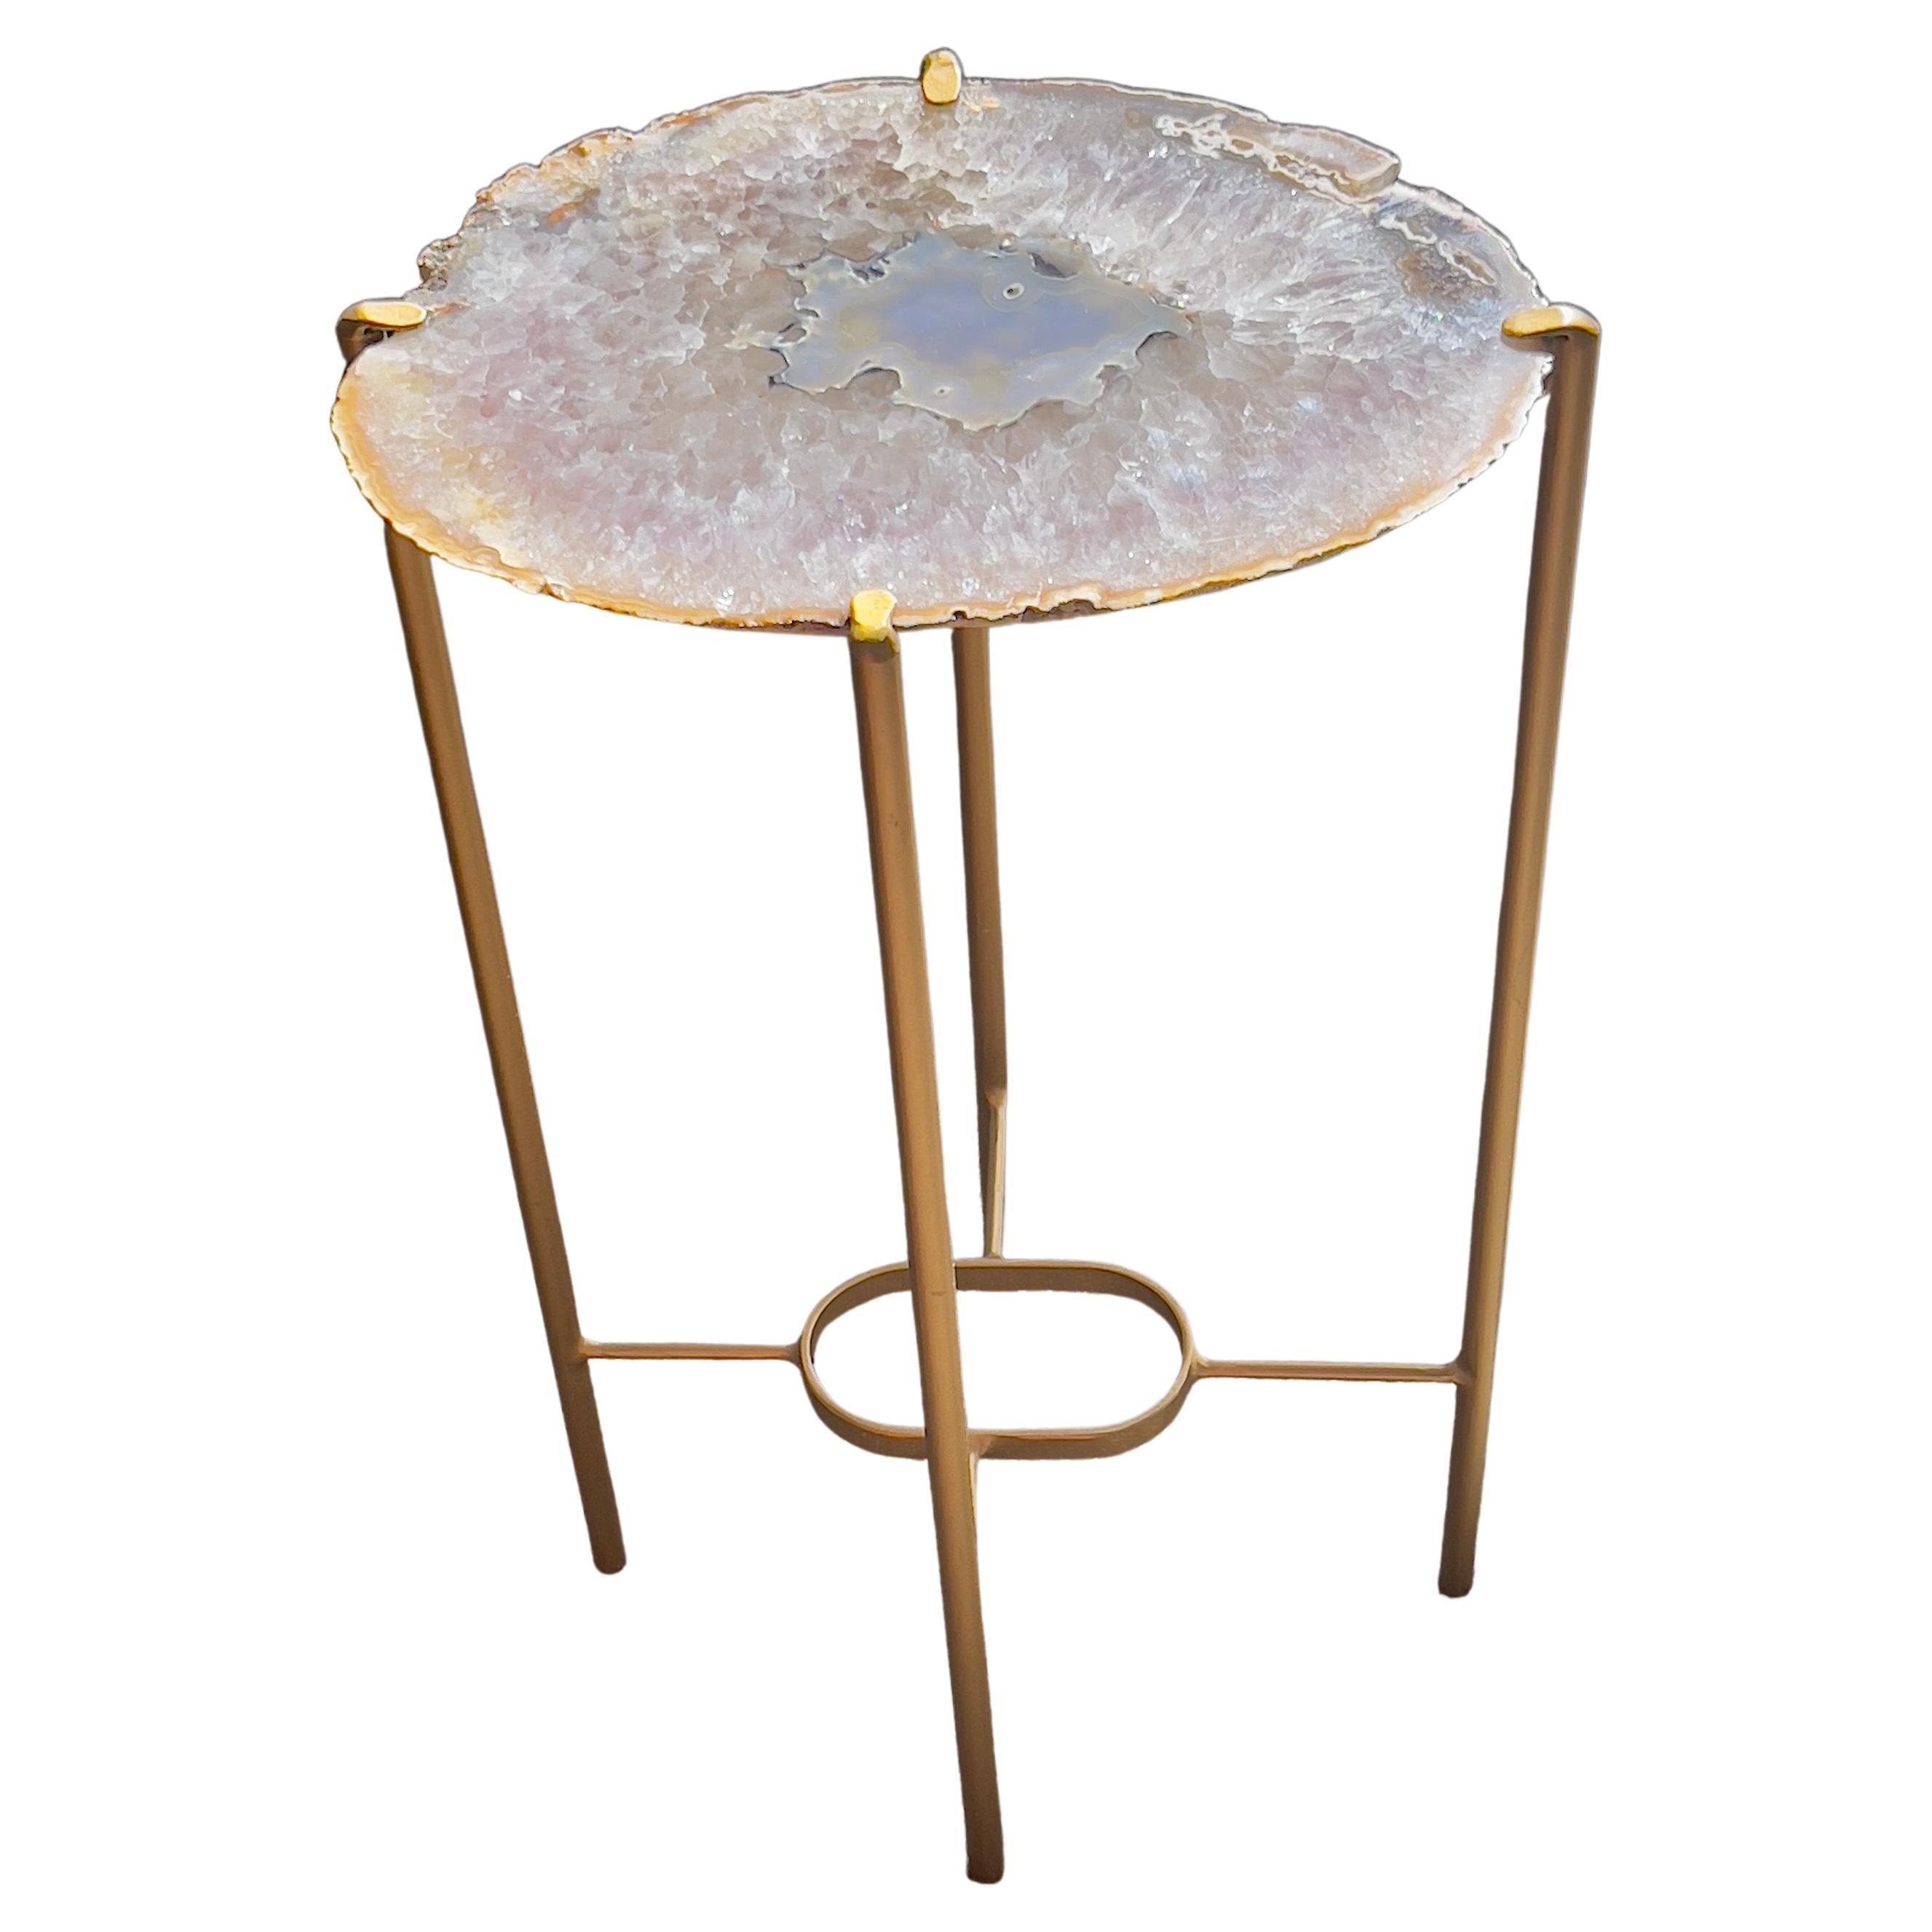 Organic Modern Grey White Black Geode Drink Table with Gold Gilt Base